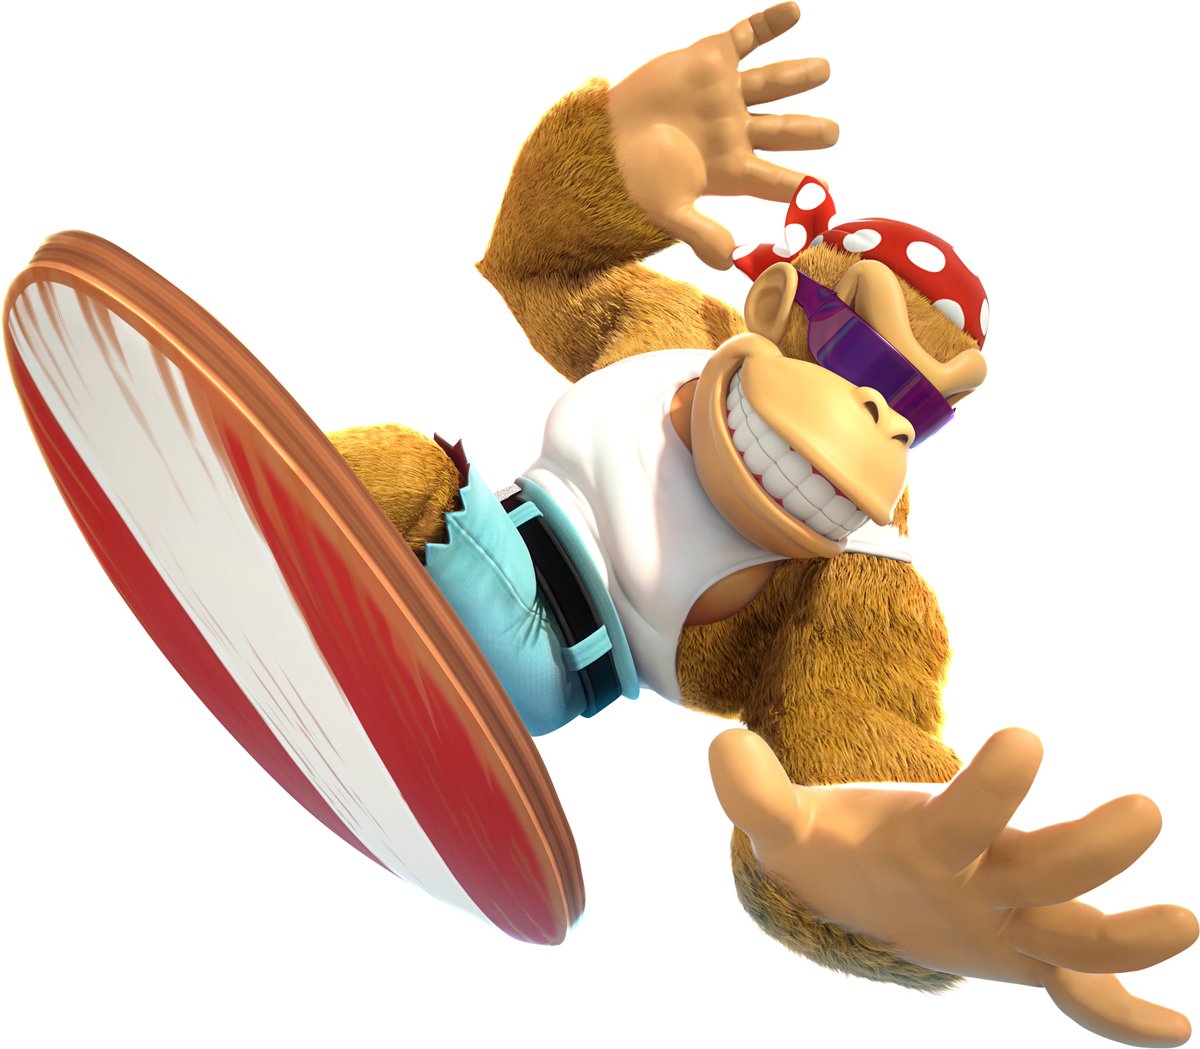 2) FUNKY KONGreally obvious choice. top-tier Kong in a lot of ways. he 100% definitely has a LOT of sex. he's the Boomhauer of the Kongs. he takes Diddy to the porno store, buys him weed, etc. On September 6 2023 Funky Kong is going to be Me Too'd